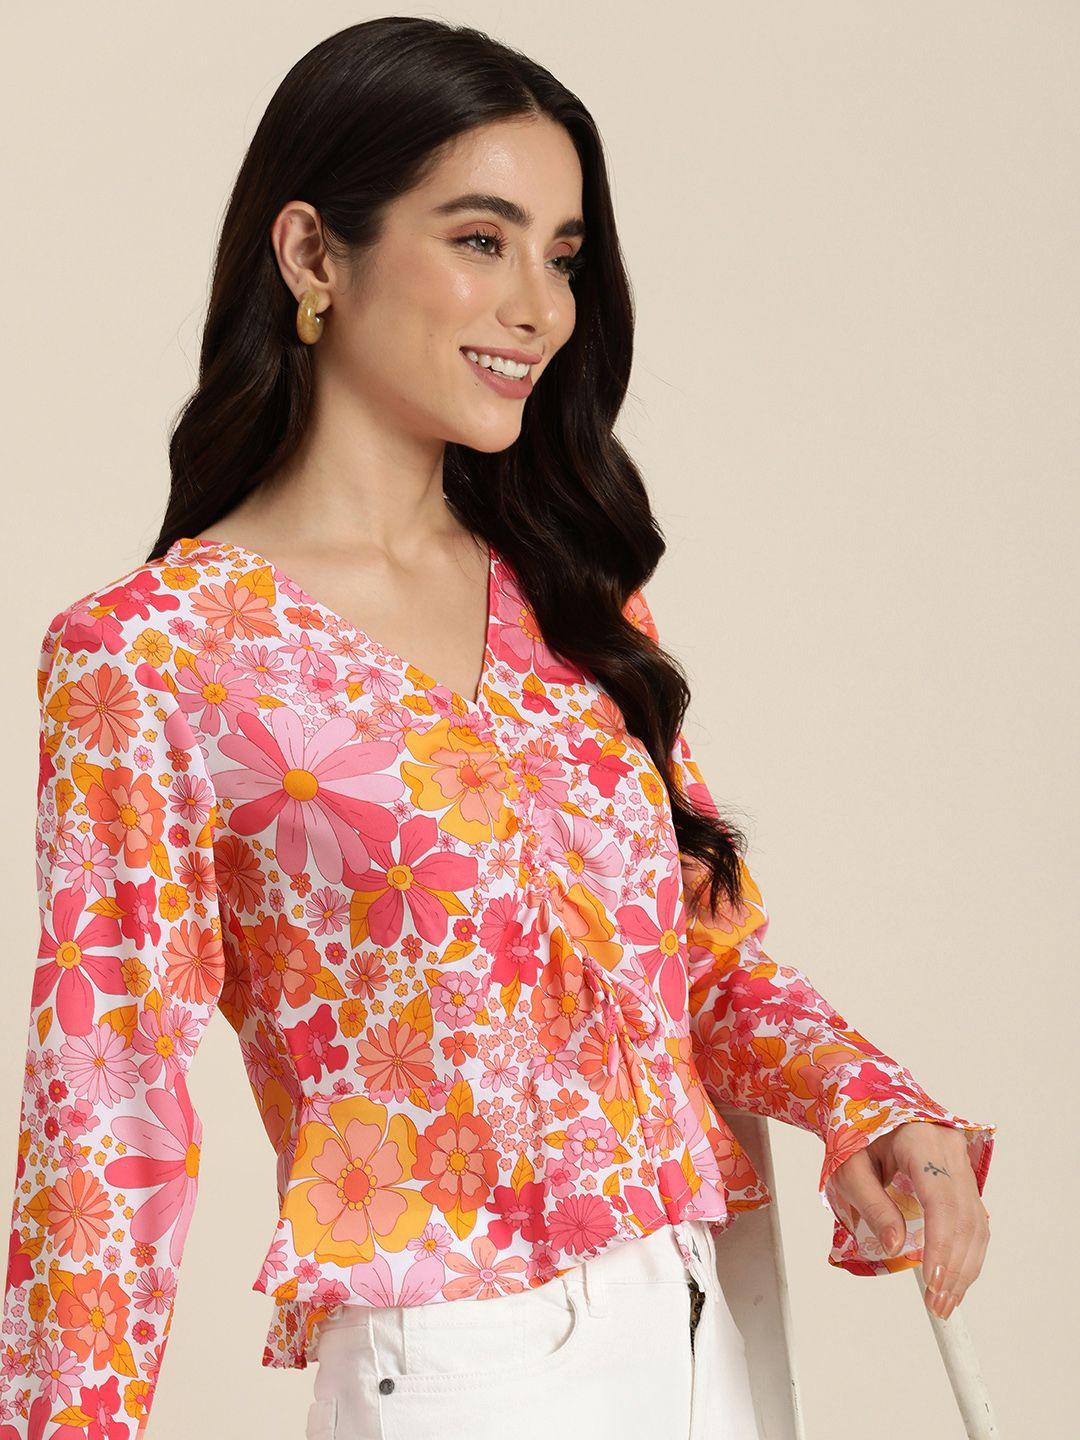 encore by invictus floral print bell sleeve peplum top